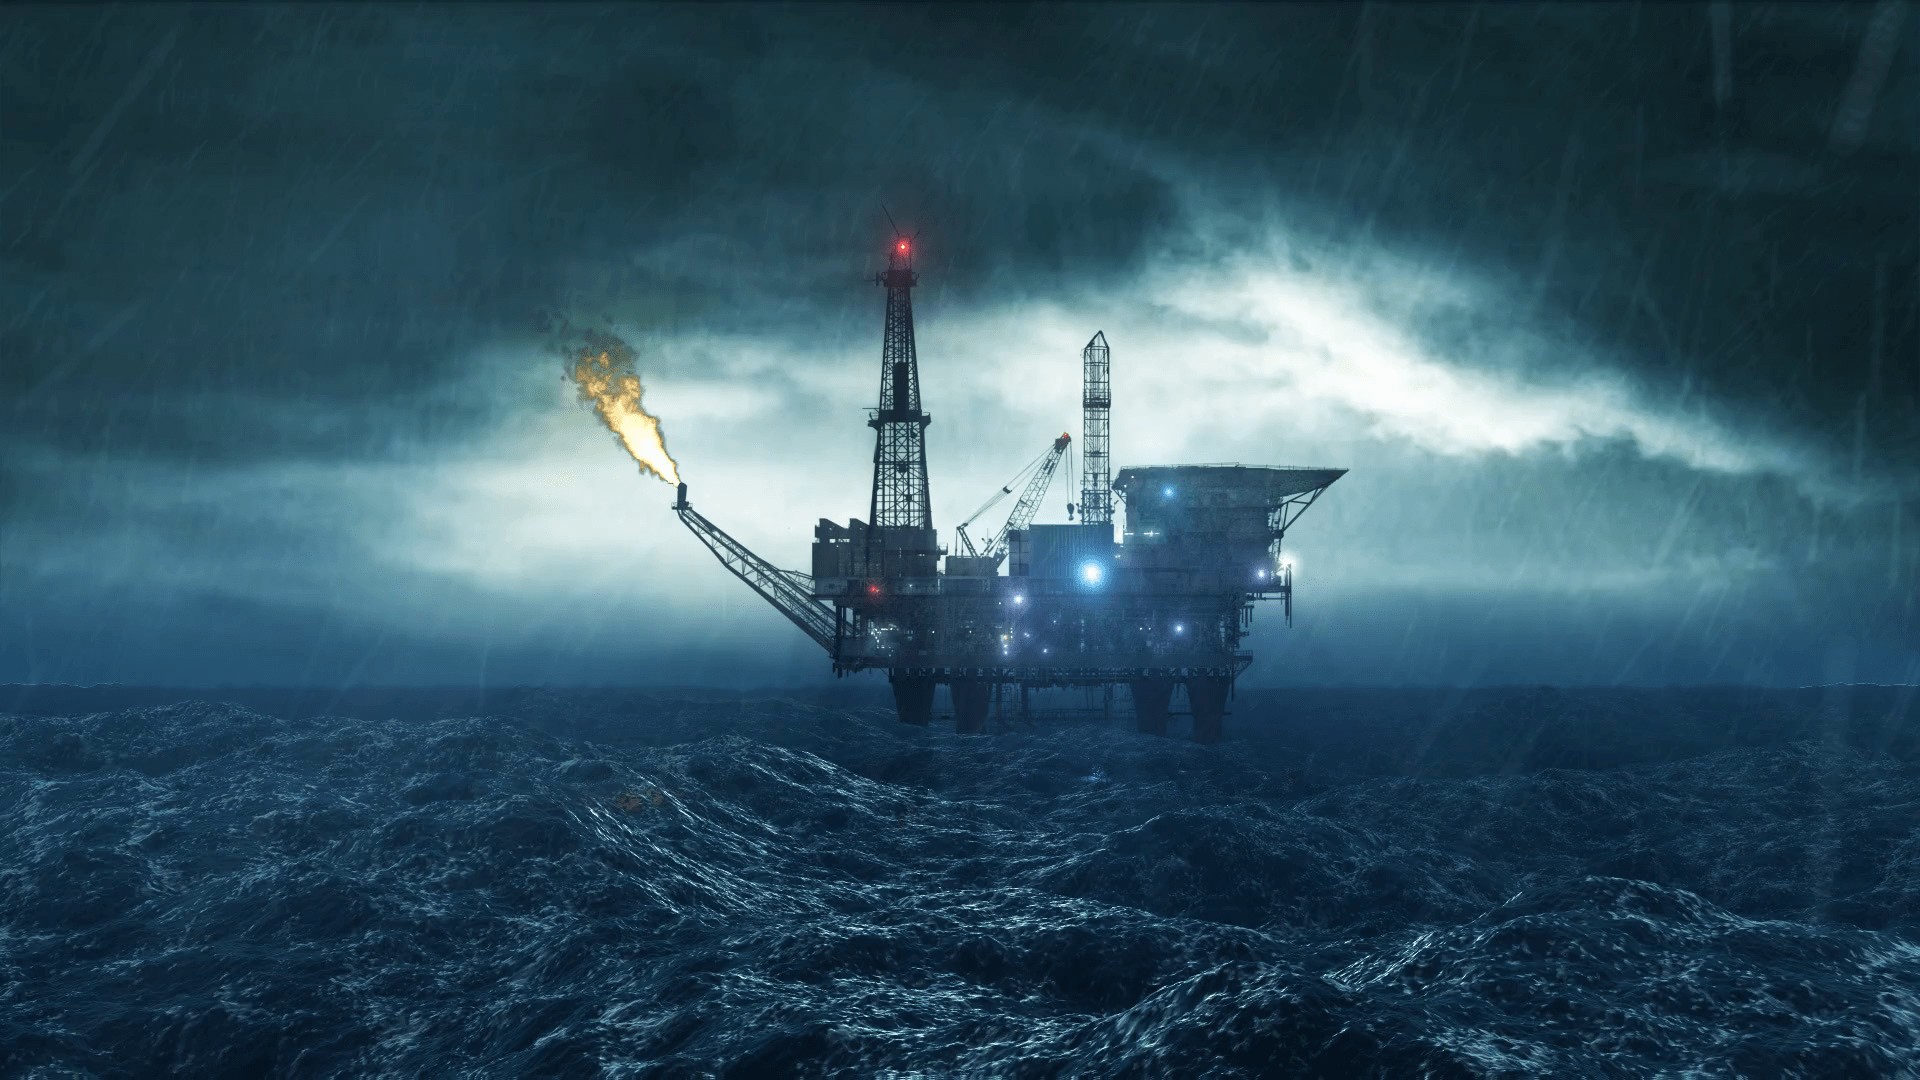 1920x1080 Oil Platform In The Storm Loop Hd Motion Background